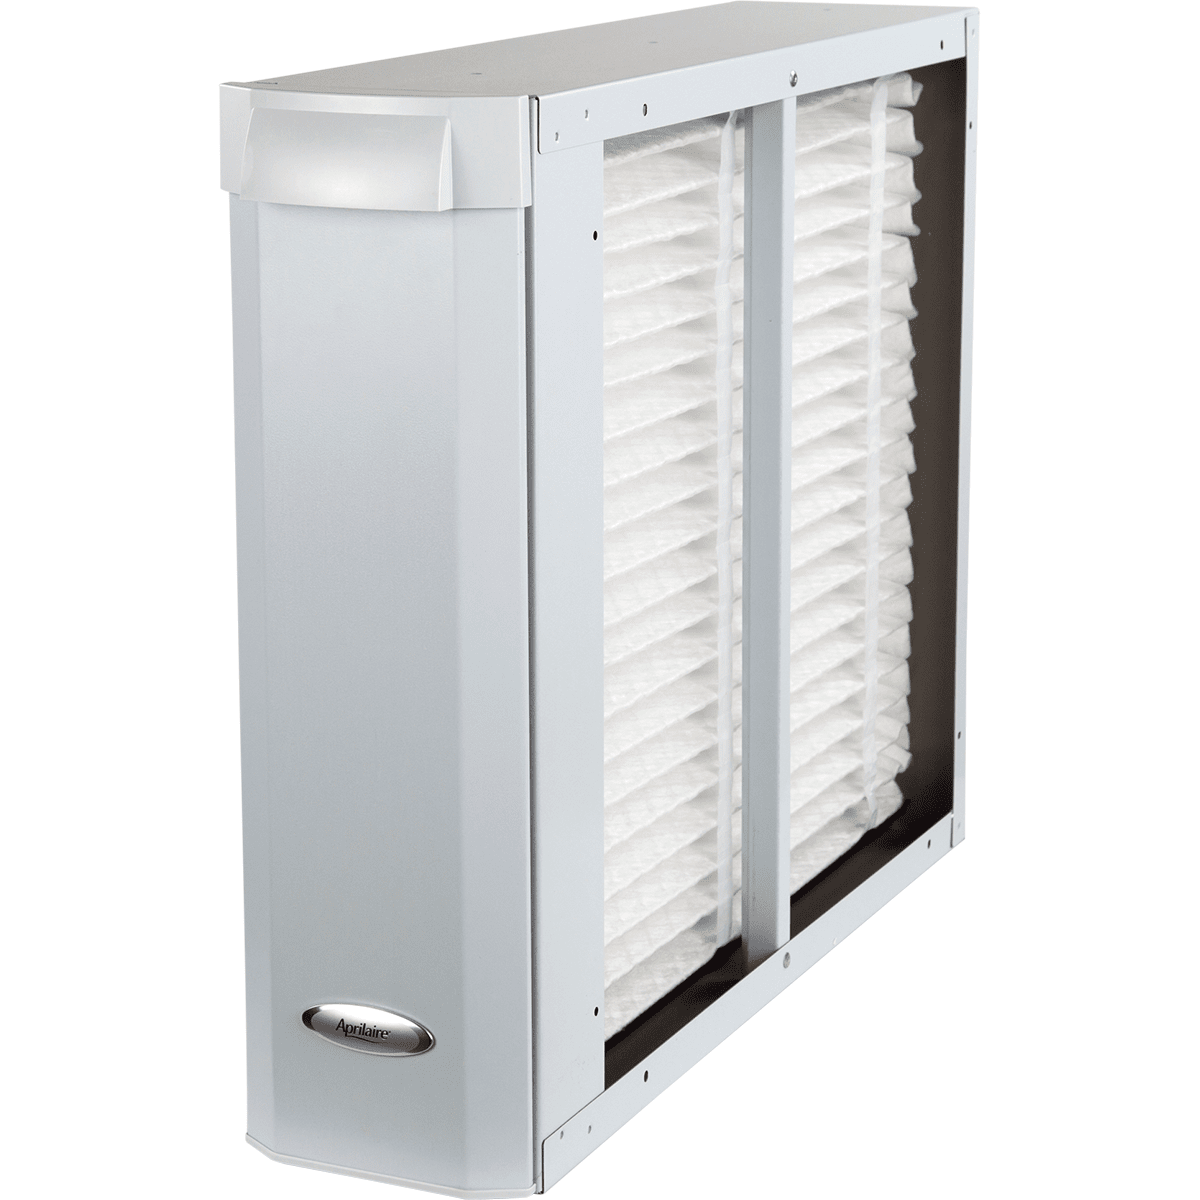 Aprilaire 2210 Whole House Air Cleaner